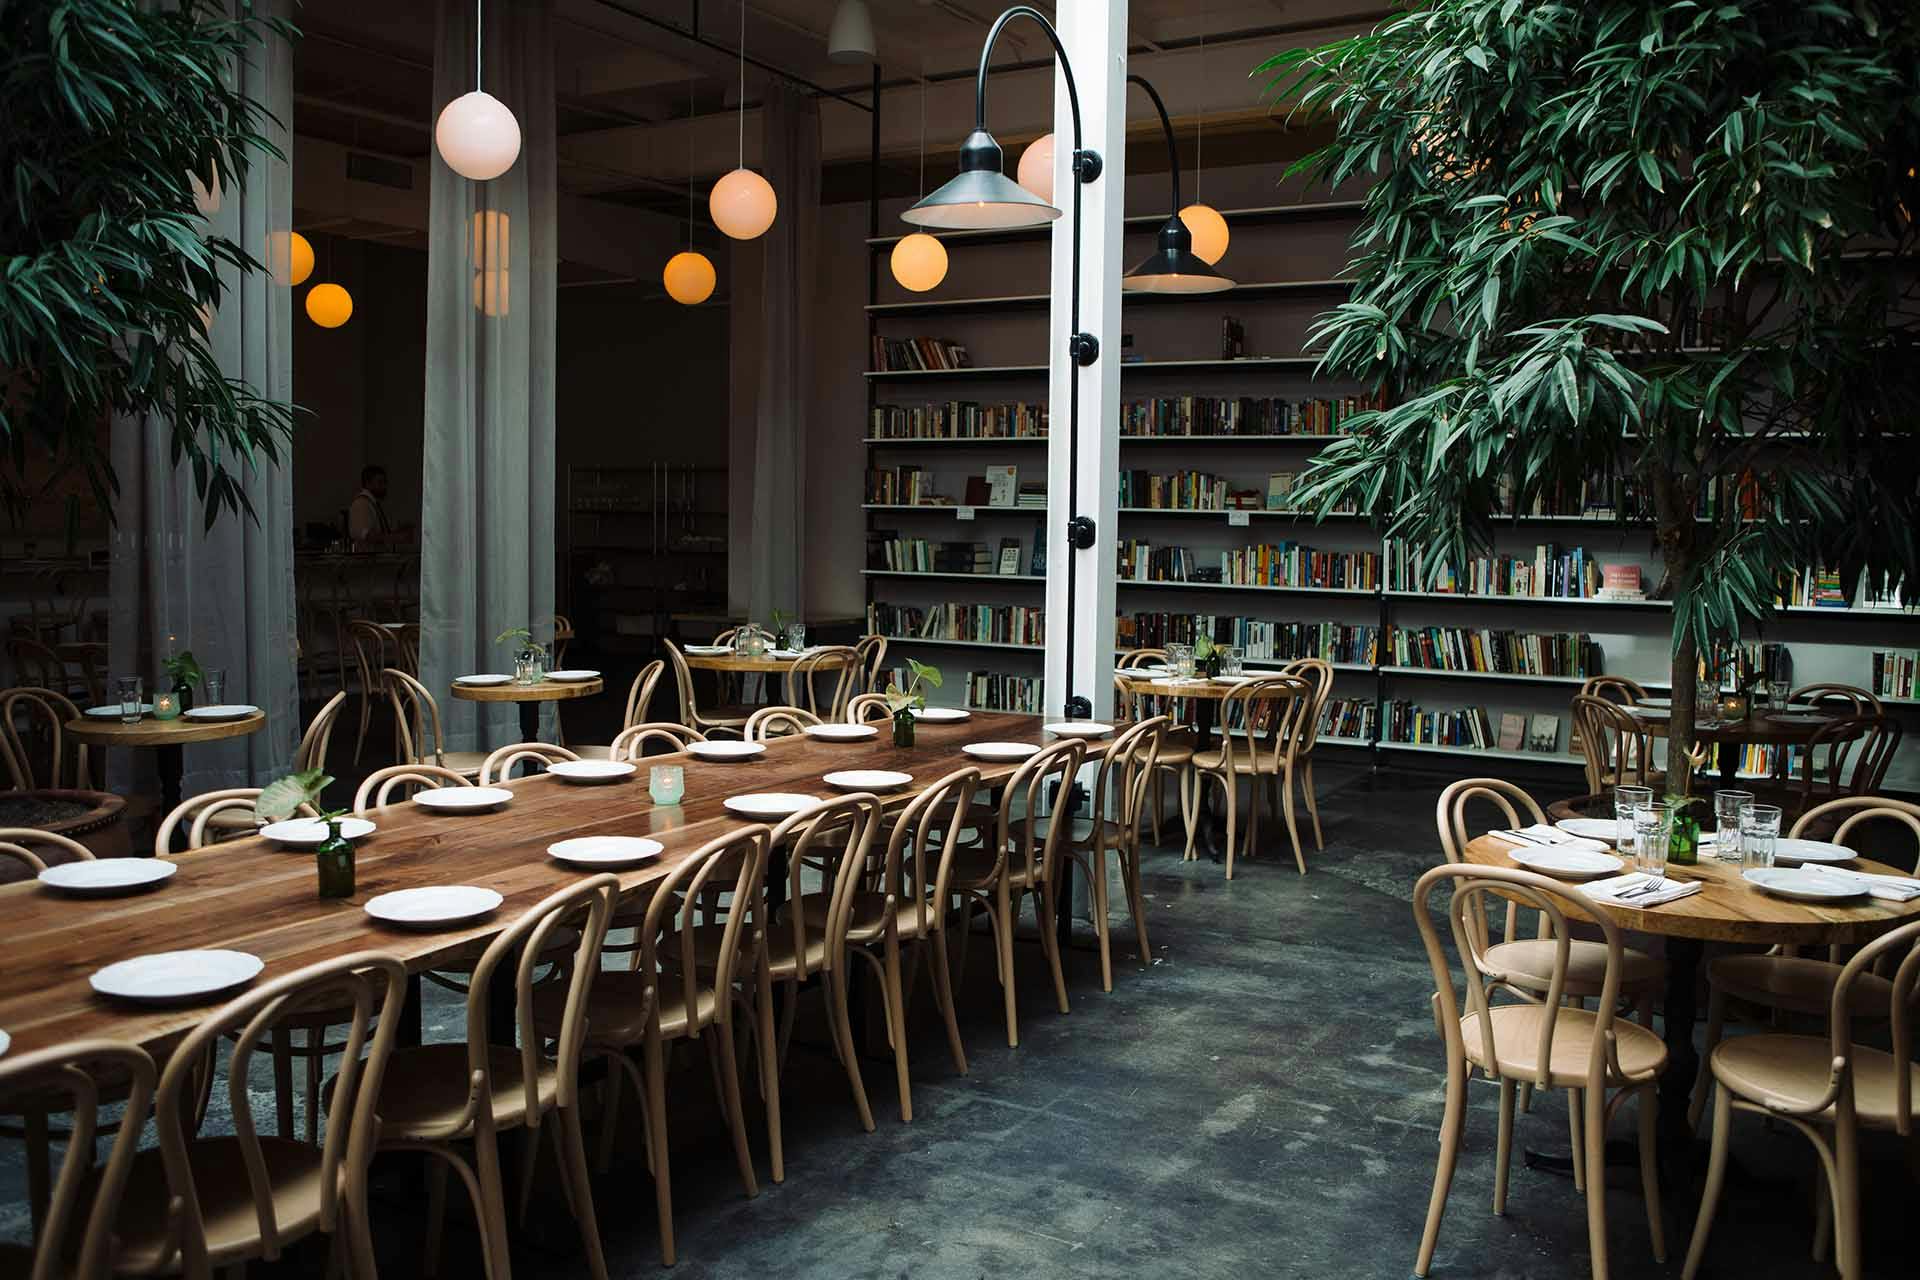 Long set tables in taproom with plants and soft globe lighting